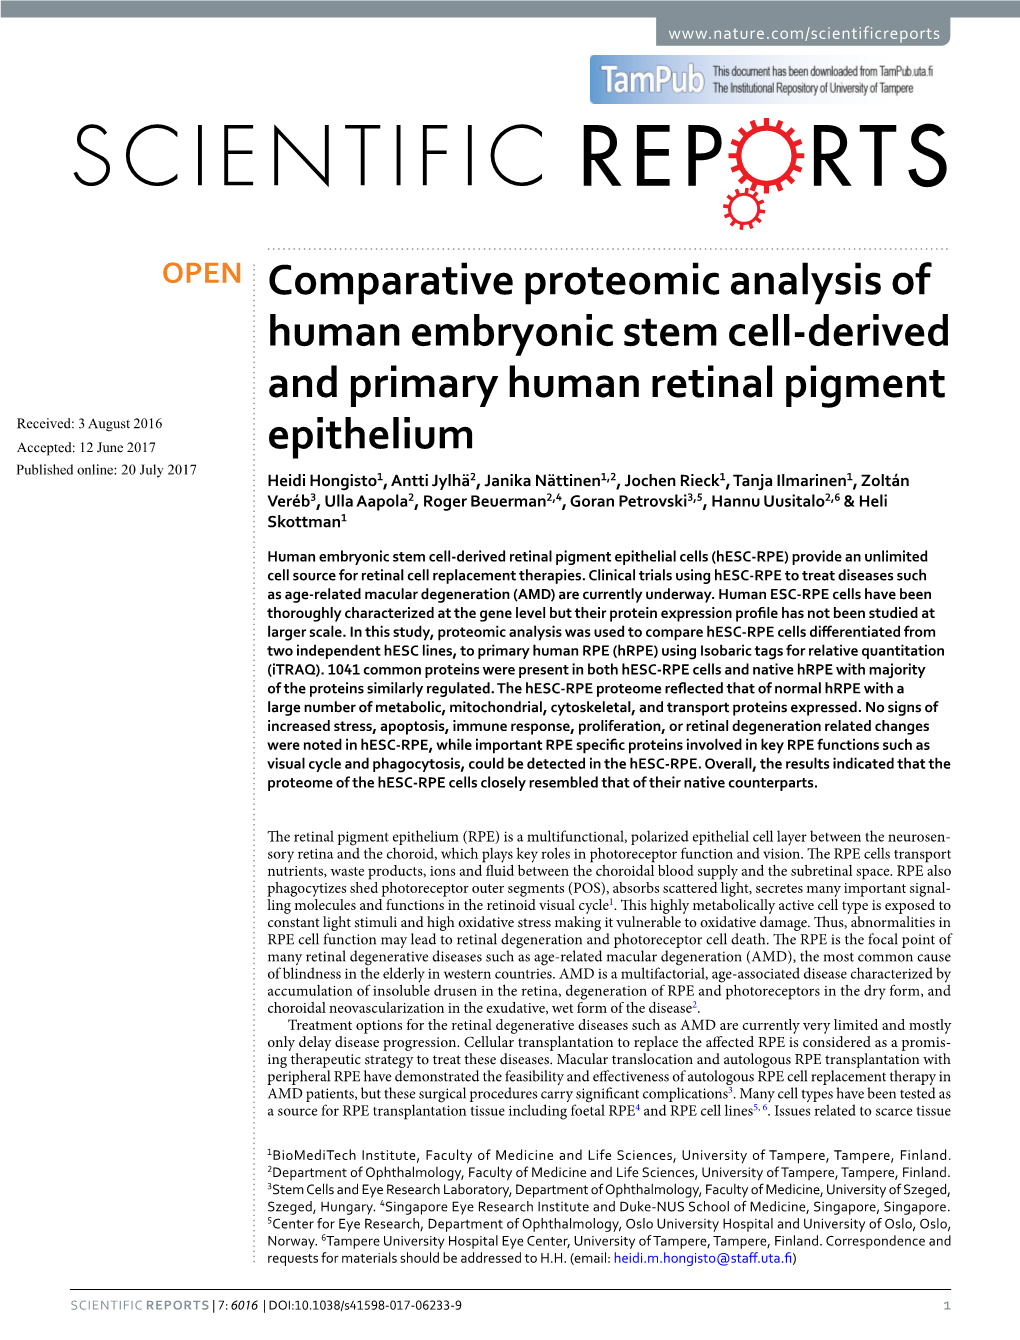 Comparative Proteomic Analysis of Human Embryonic Stem Cell-Derived